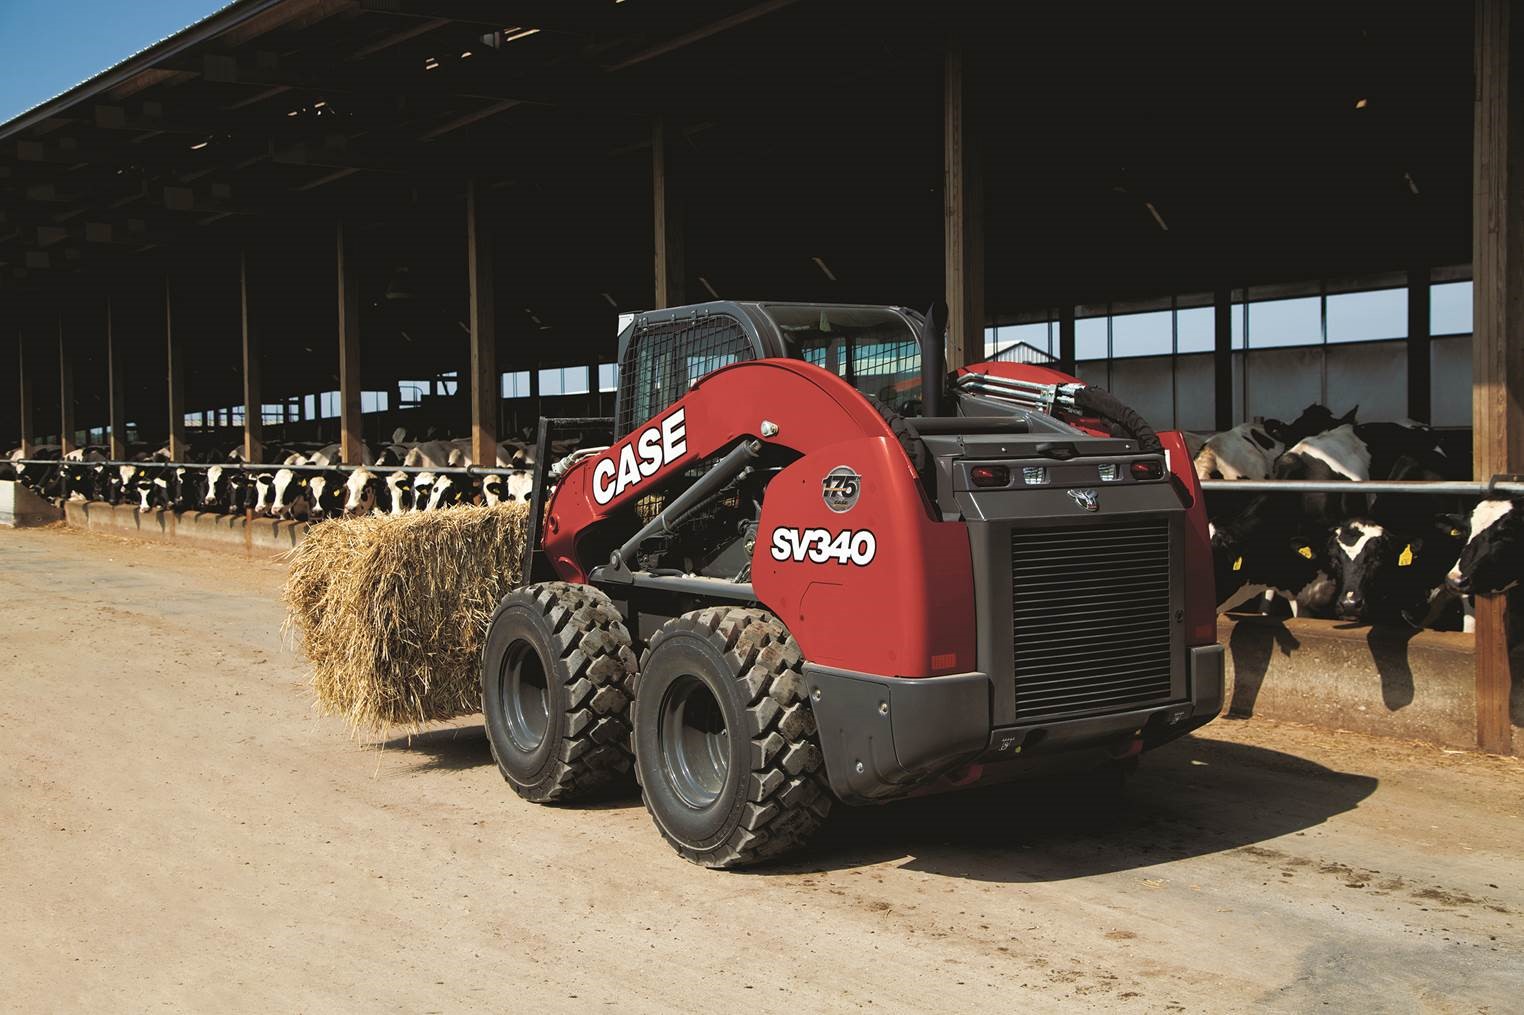 CASE Releases Limited Edition Red Skid Steer and Compact Track Loader Line in Honor of 175th Anniversary